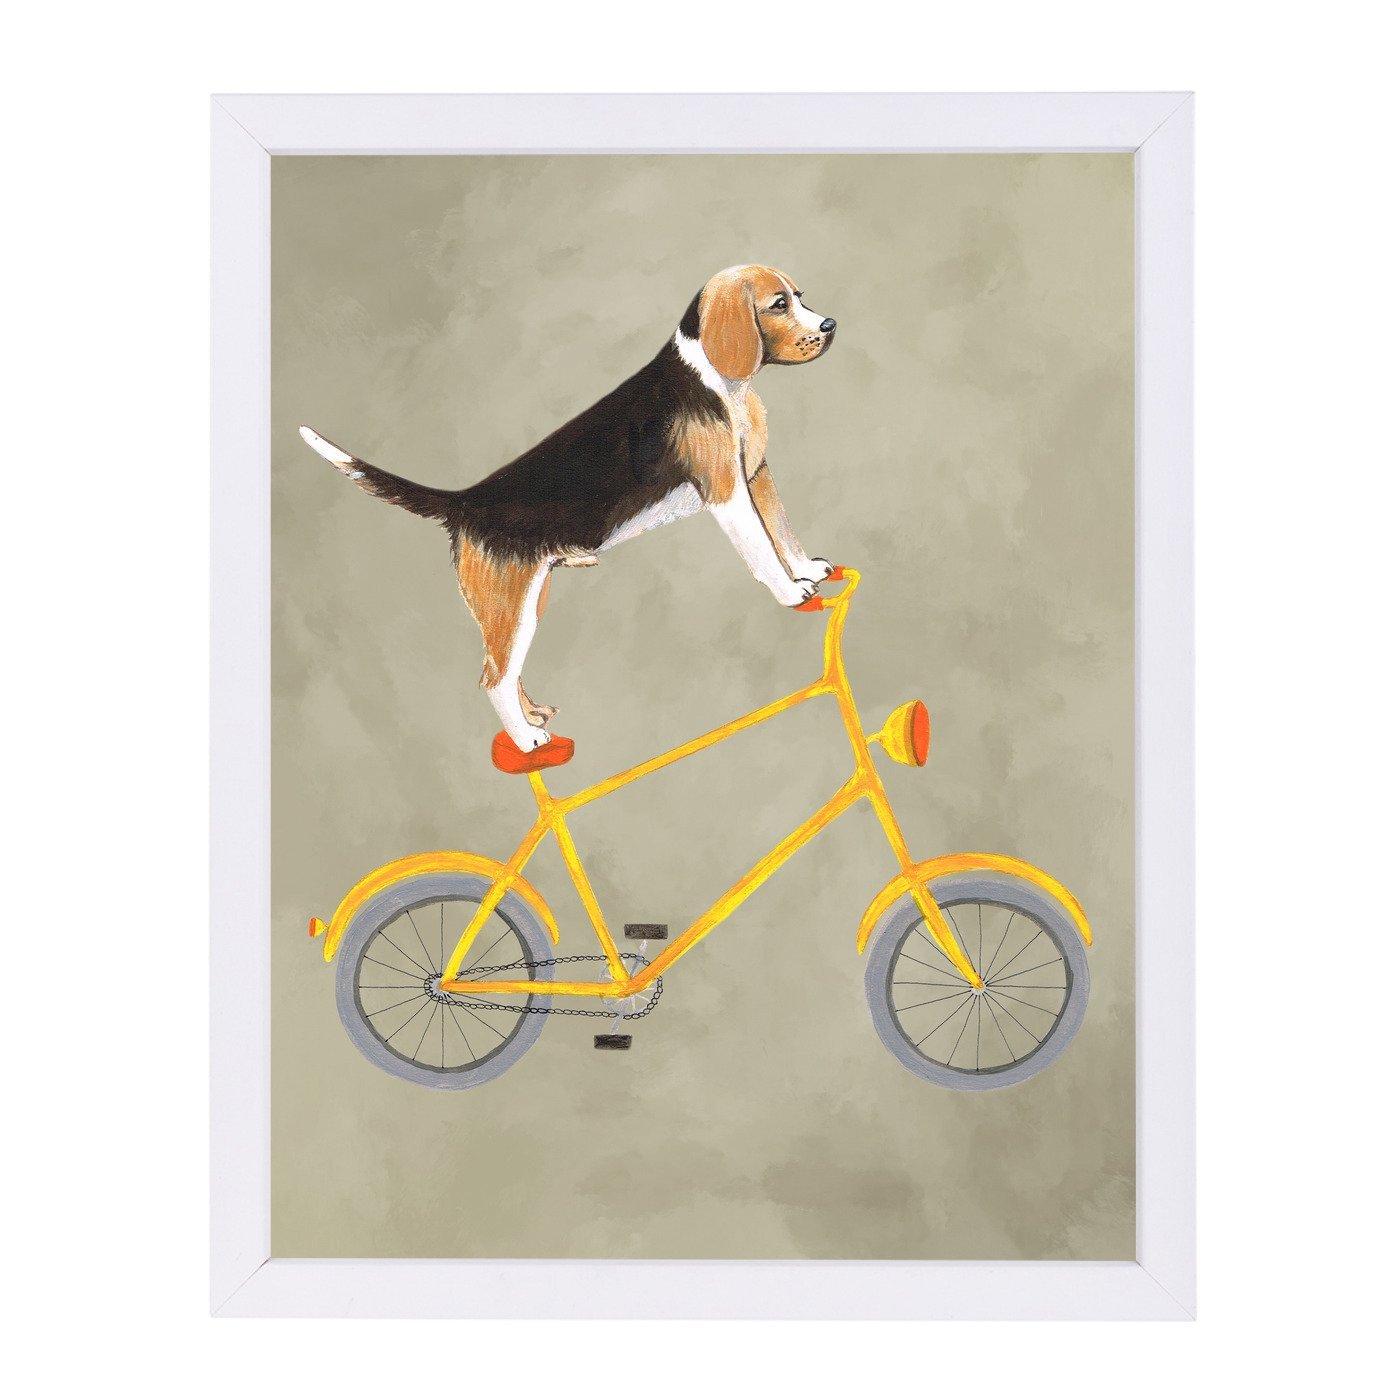 Beagle On Bicycle By Coco De Paris - Framed Print - Americanflat